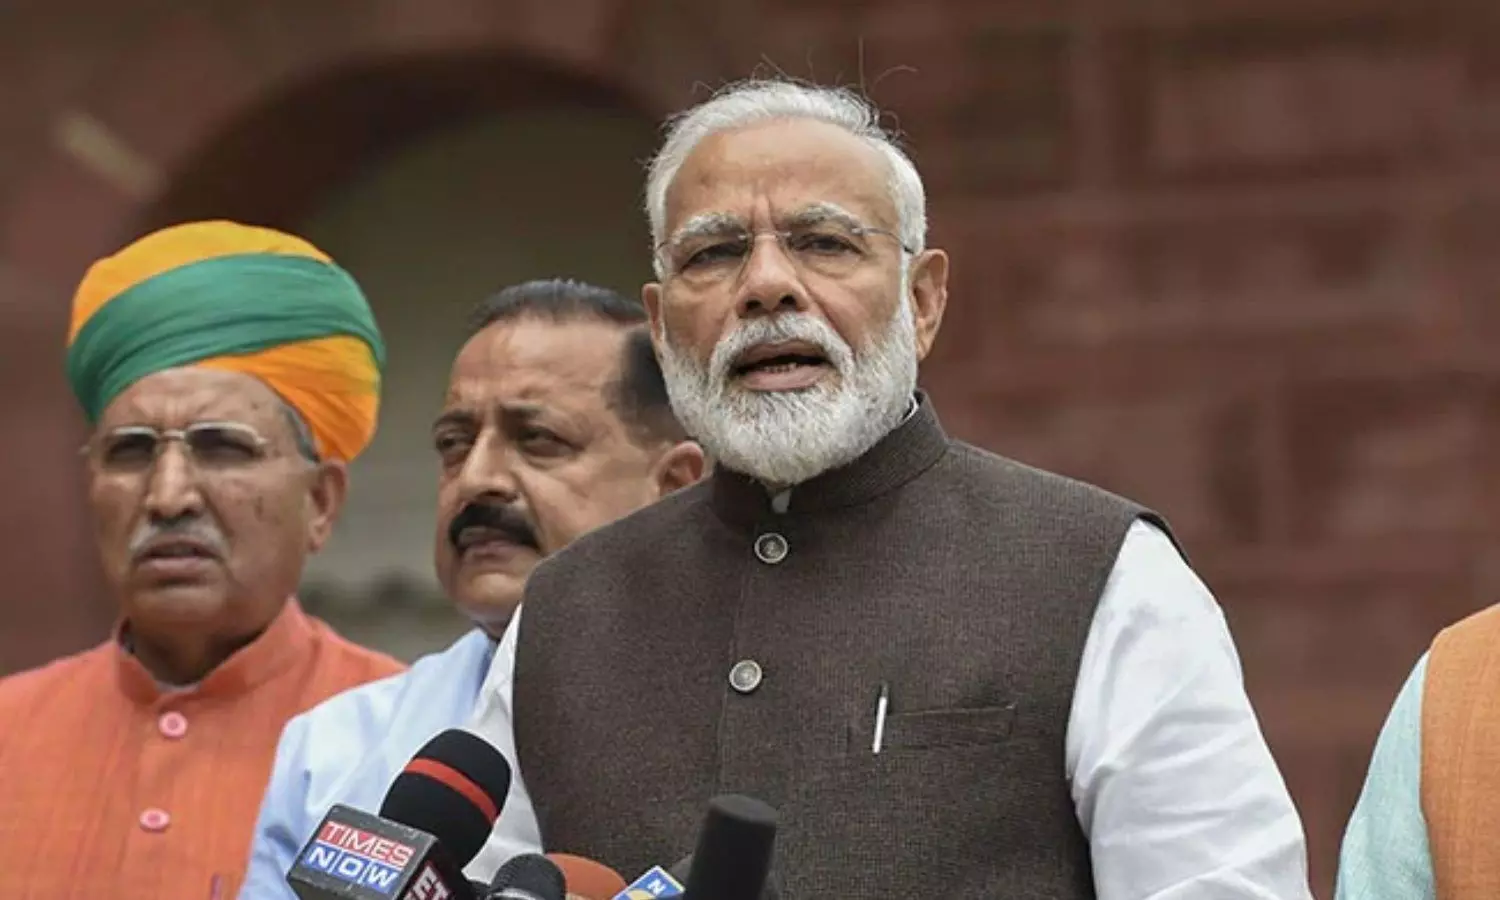 PM Modi appealed for Parliament Winter Session